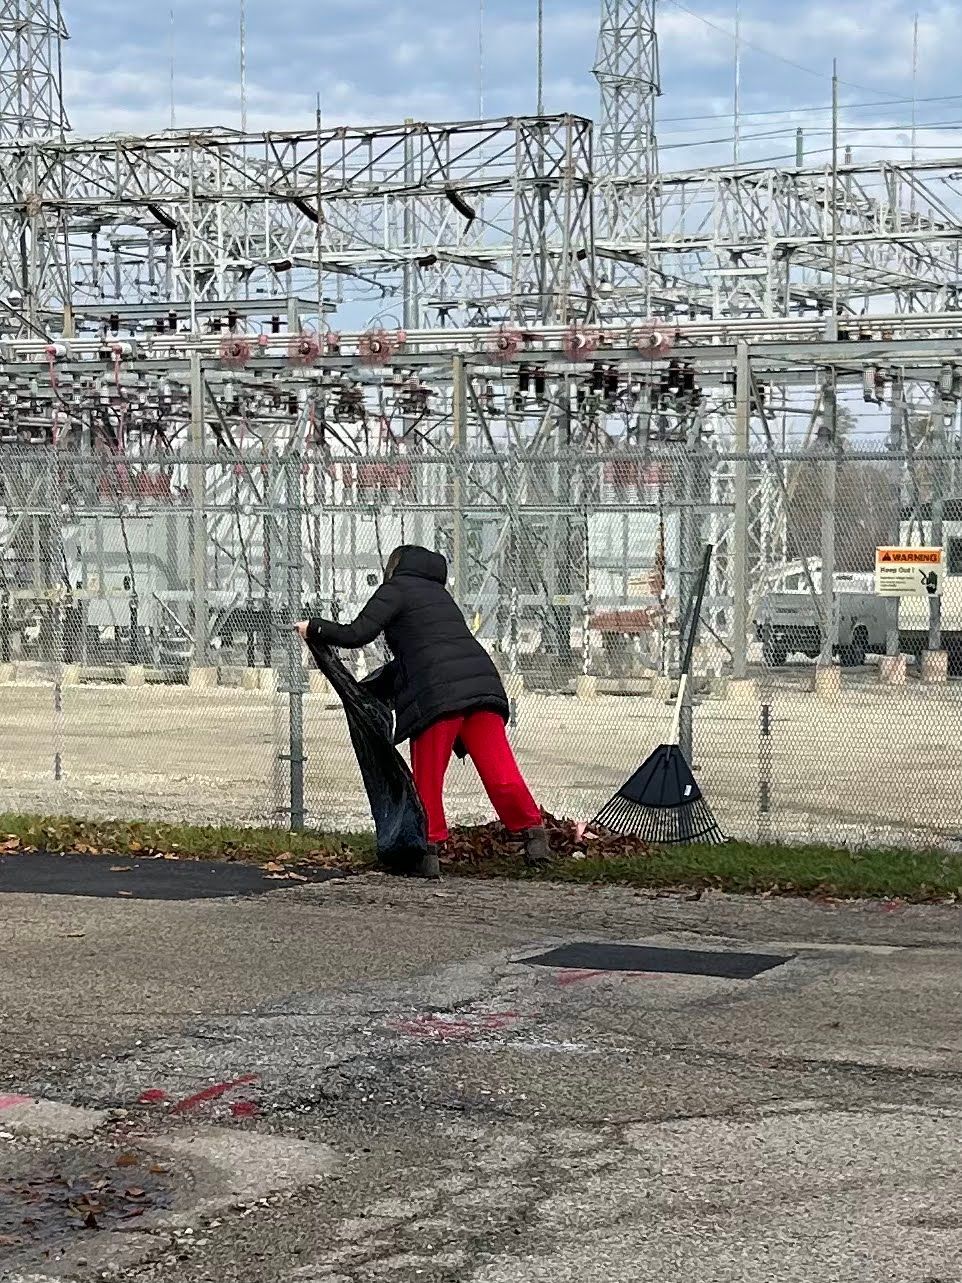 a man in red pants is sweeping the ground in front of a power plant .